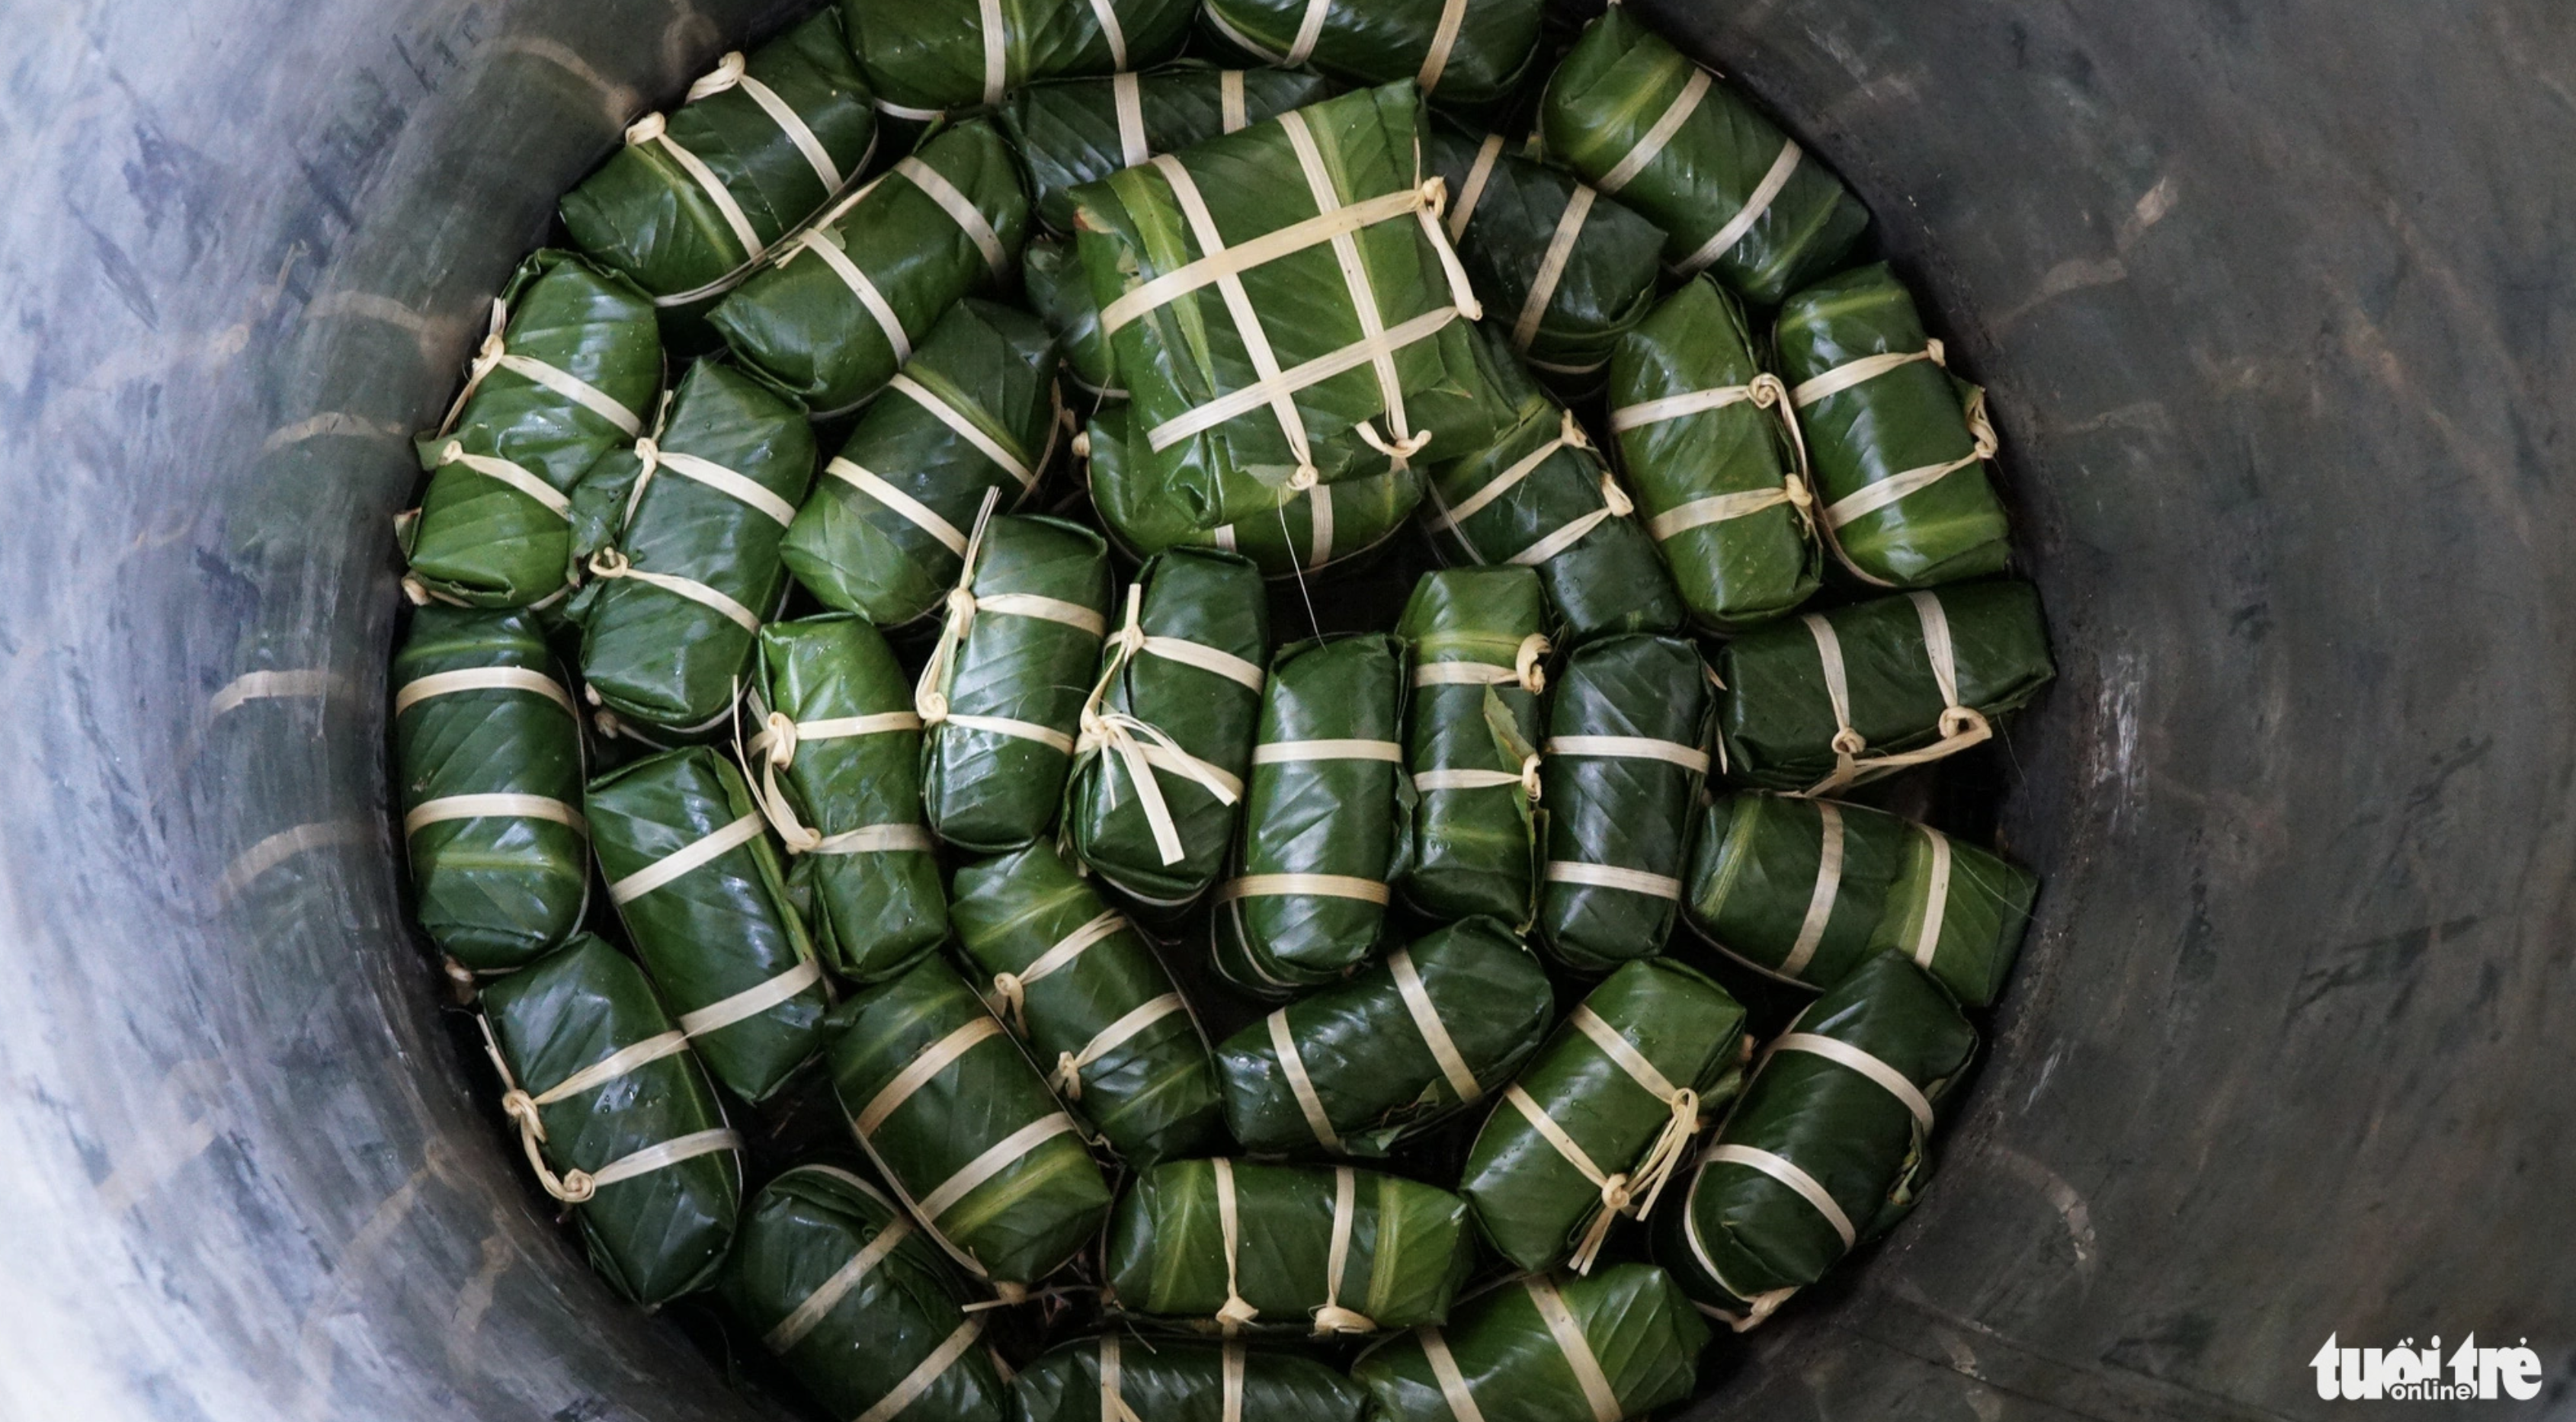 Banh chung is arranged inside a pot for cooking. Photo: Tuoi Tre